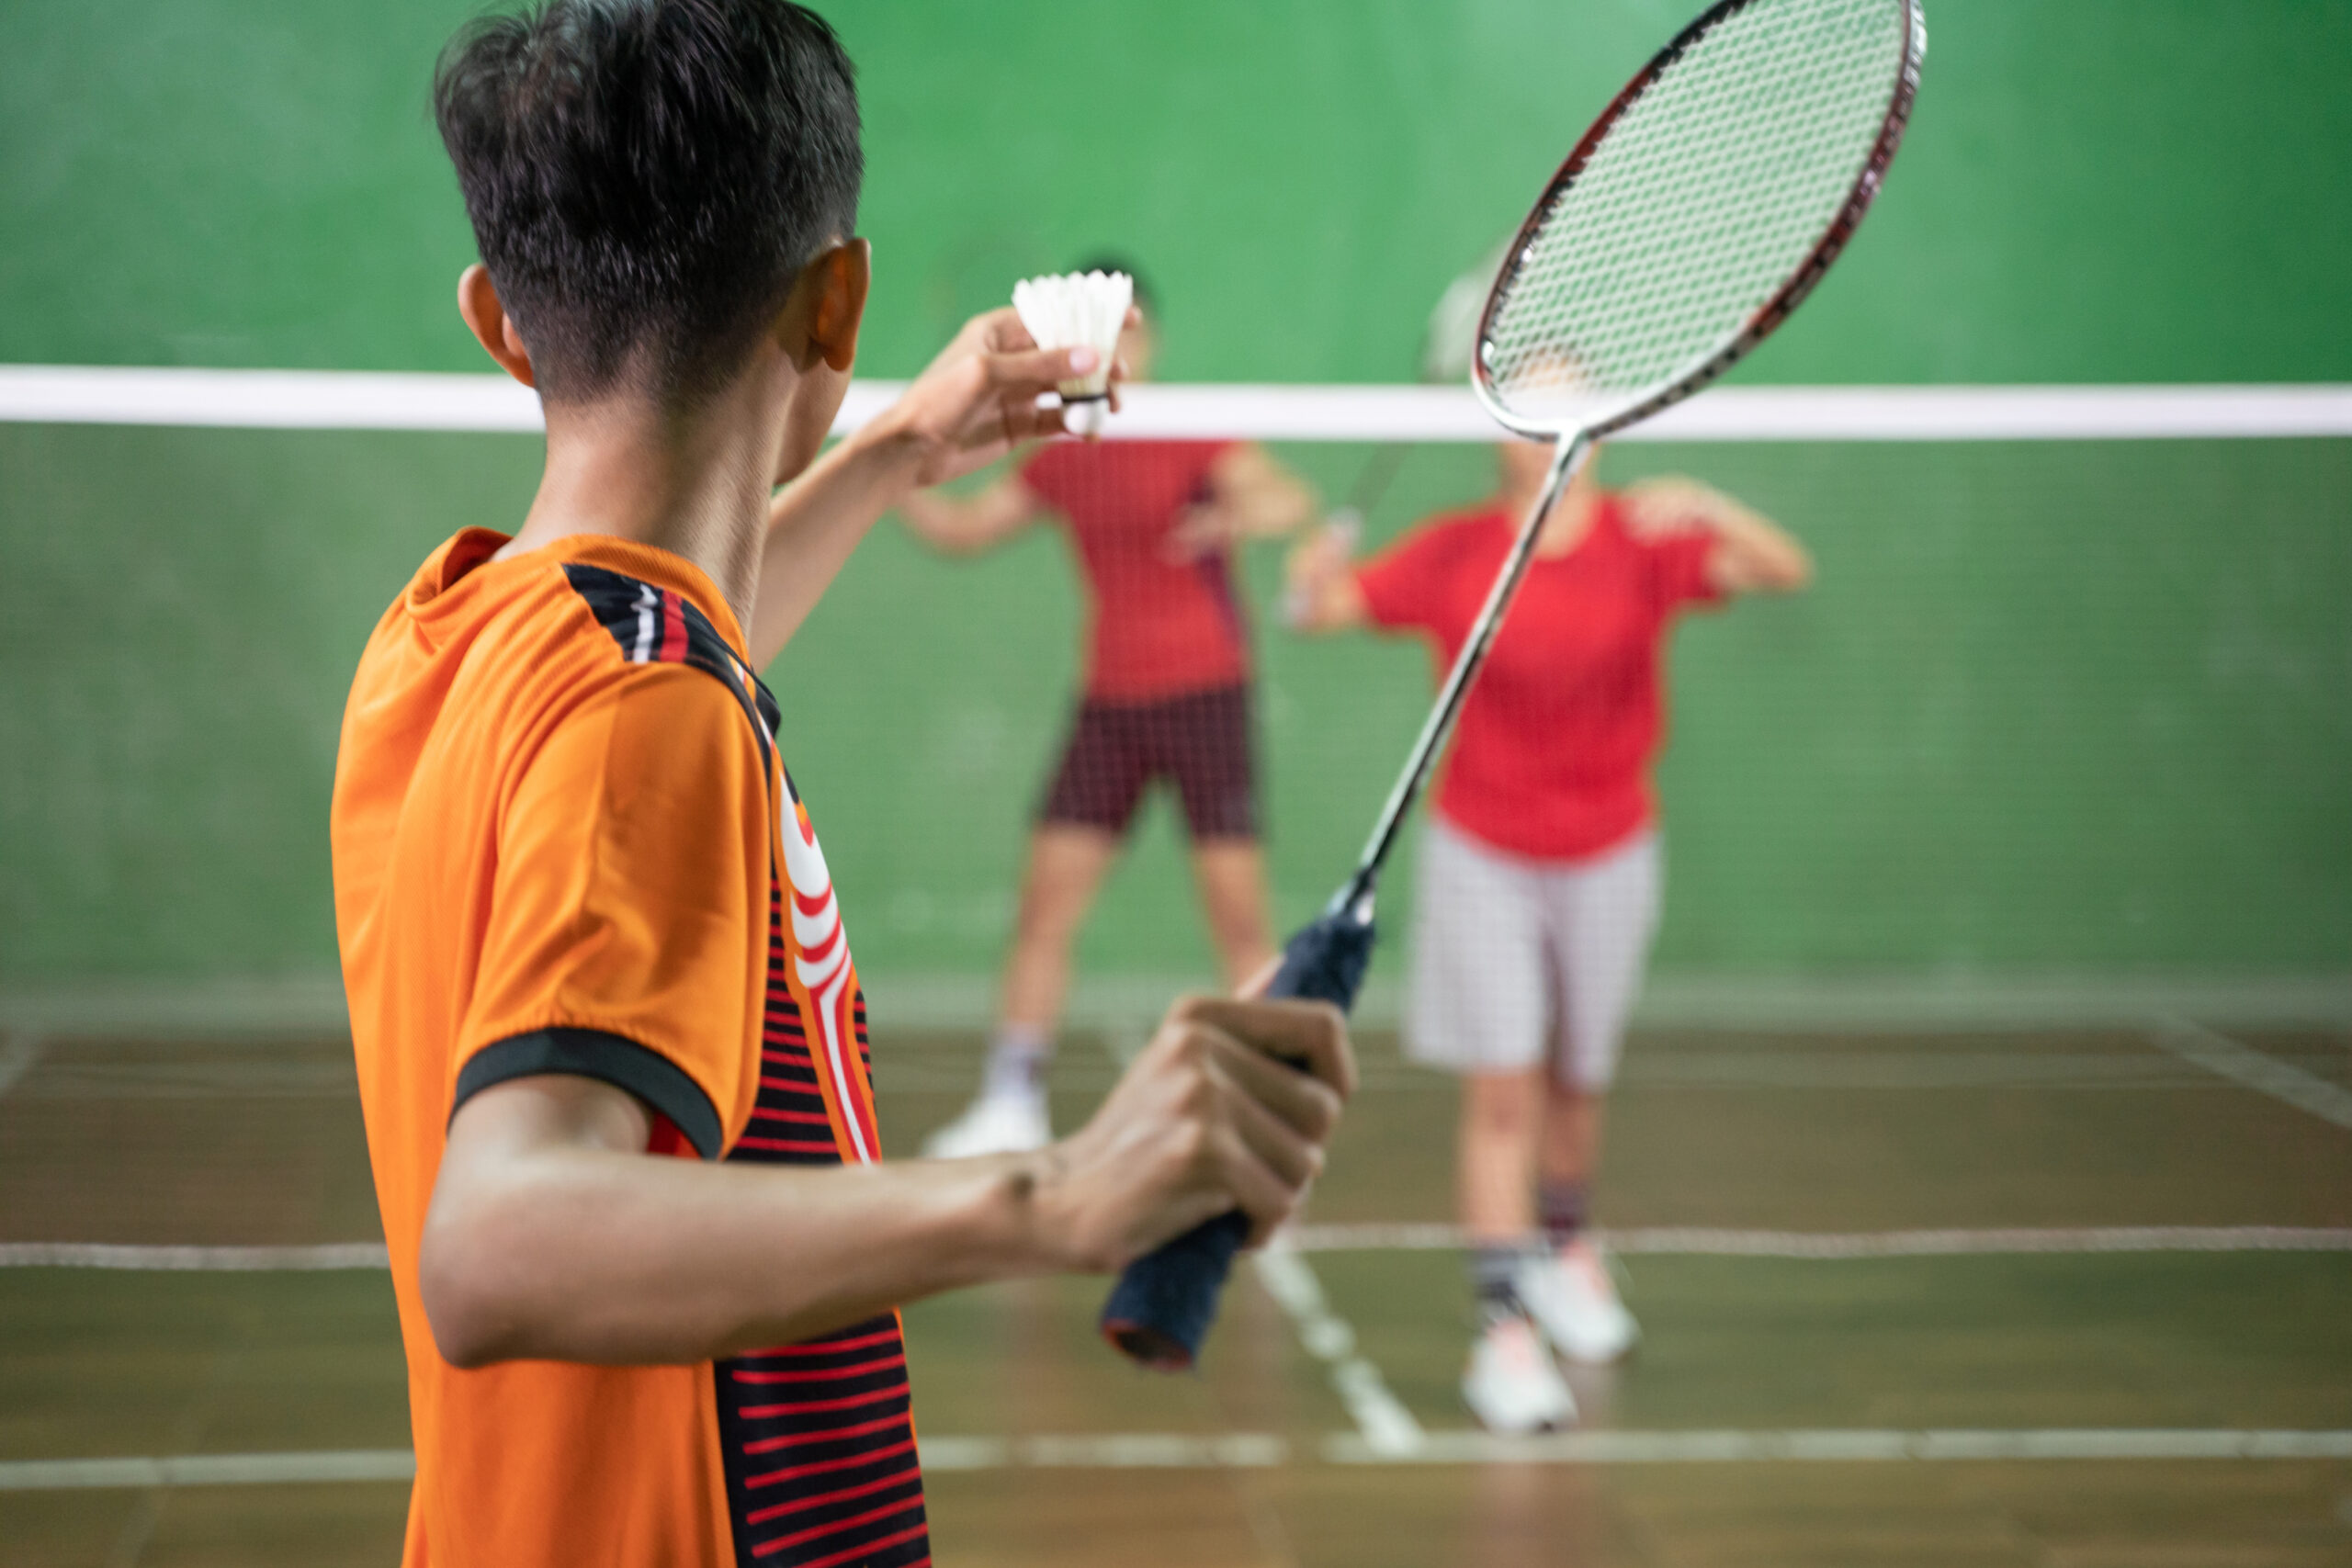 A badminton player in orange uniform holding a shuttlecock ready to serve with the opponent in a position ready to receive